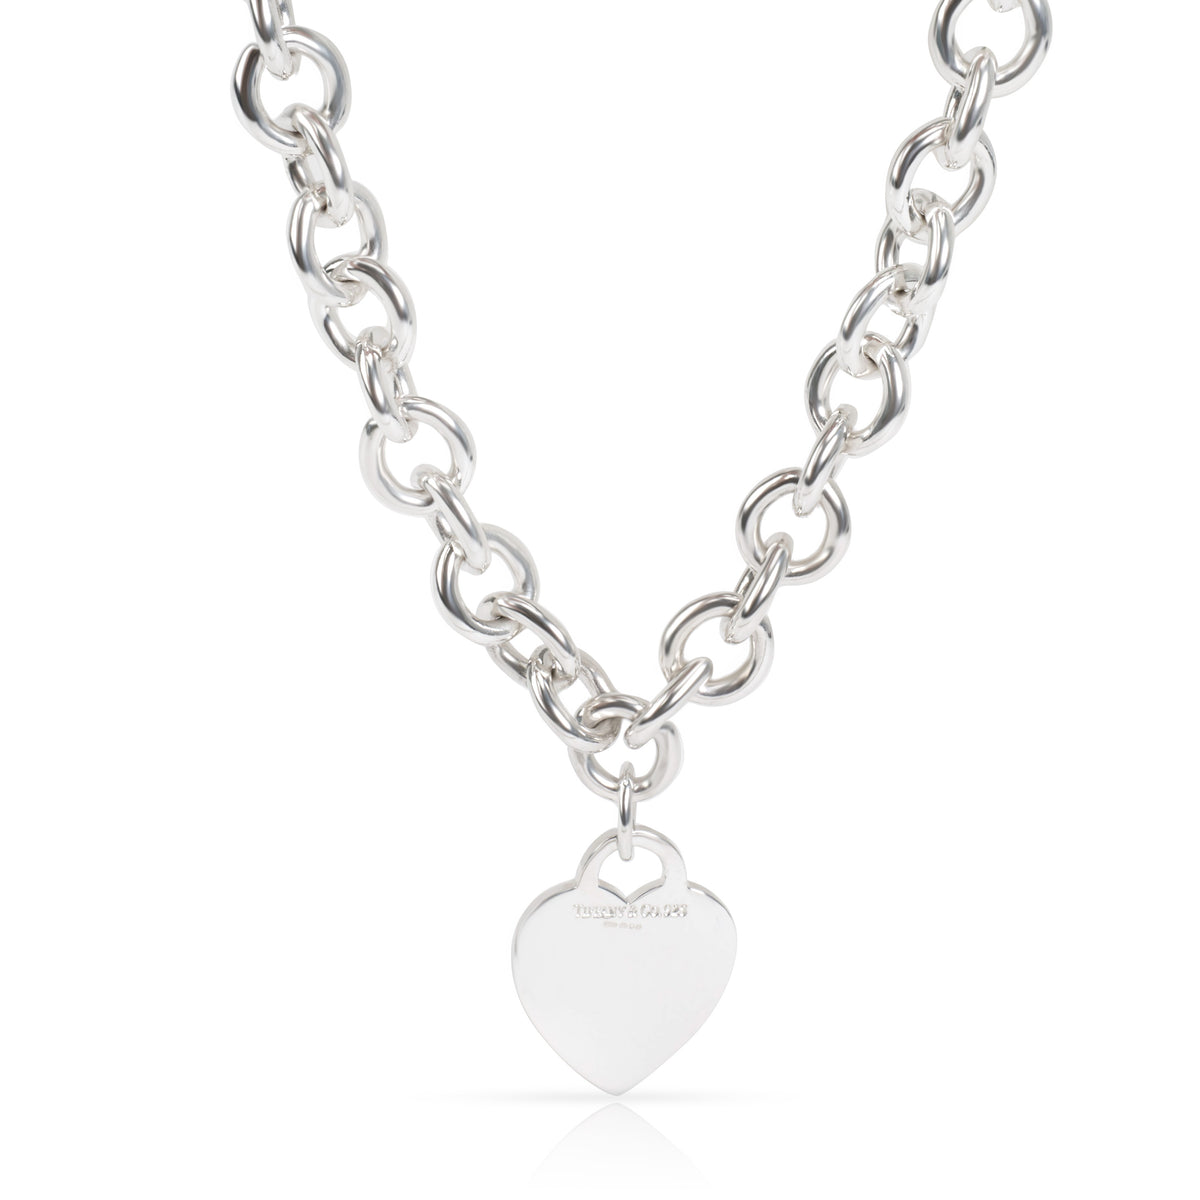 Tiffany & Co. Heart Tag Charm Necklace in  Sterling Silver